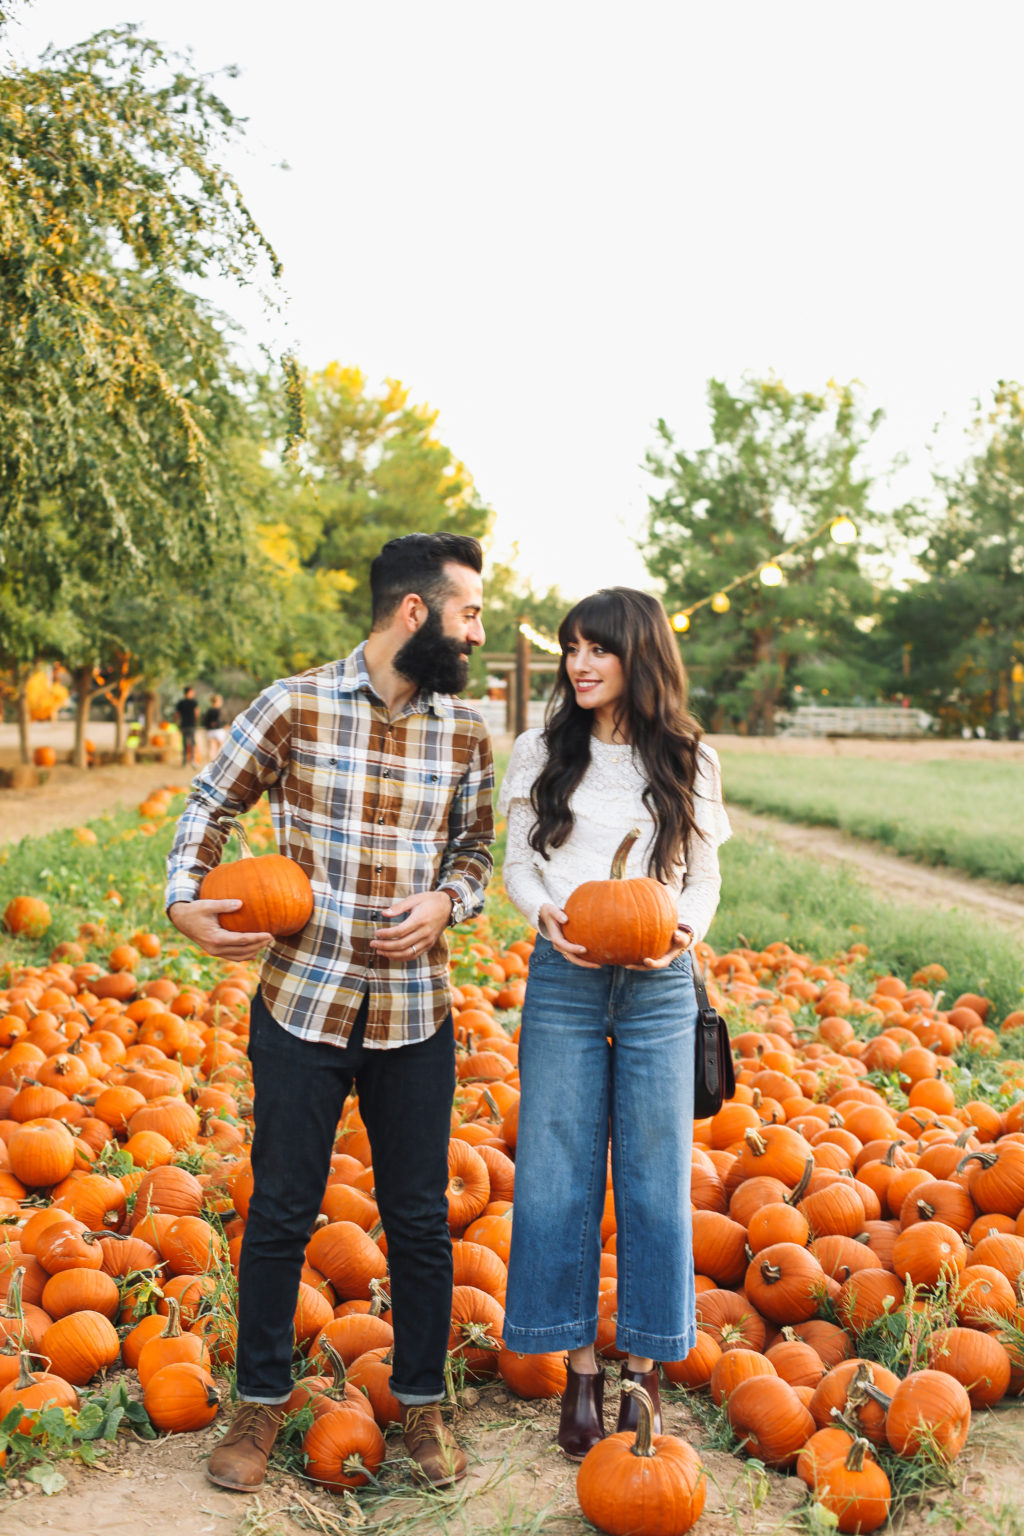 Fall Traditions Pumpkin Picking Couples Outfits